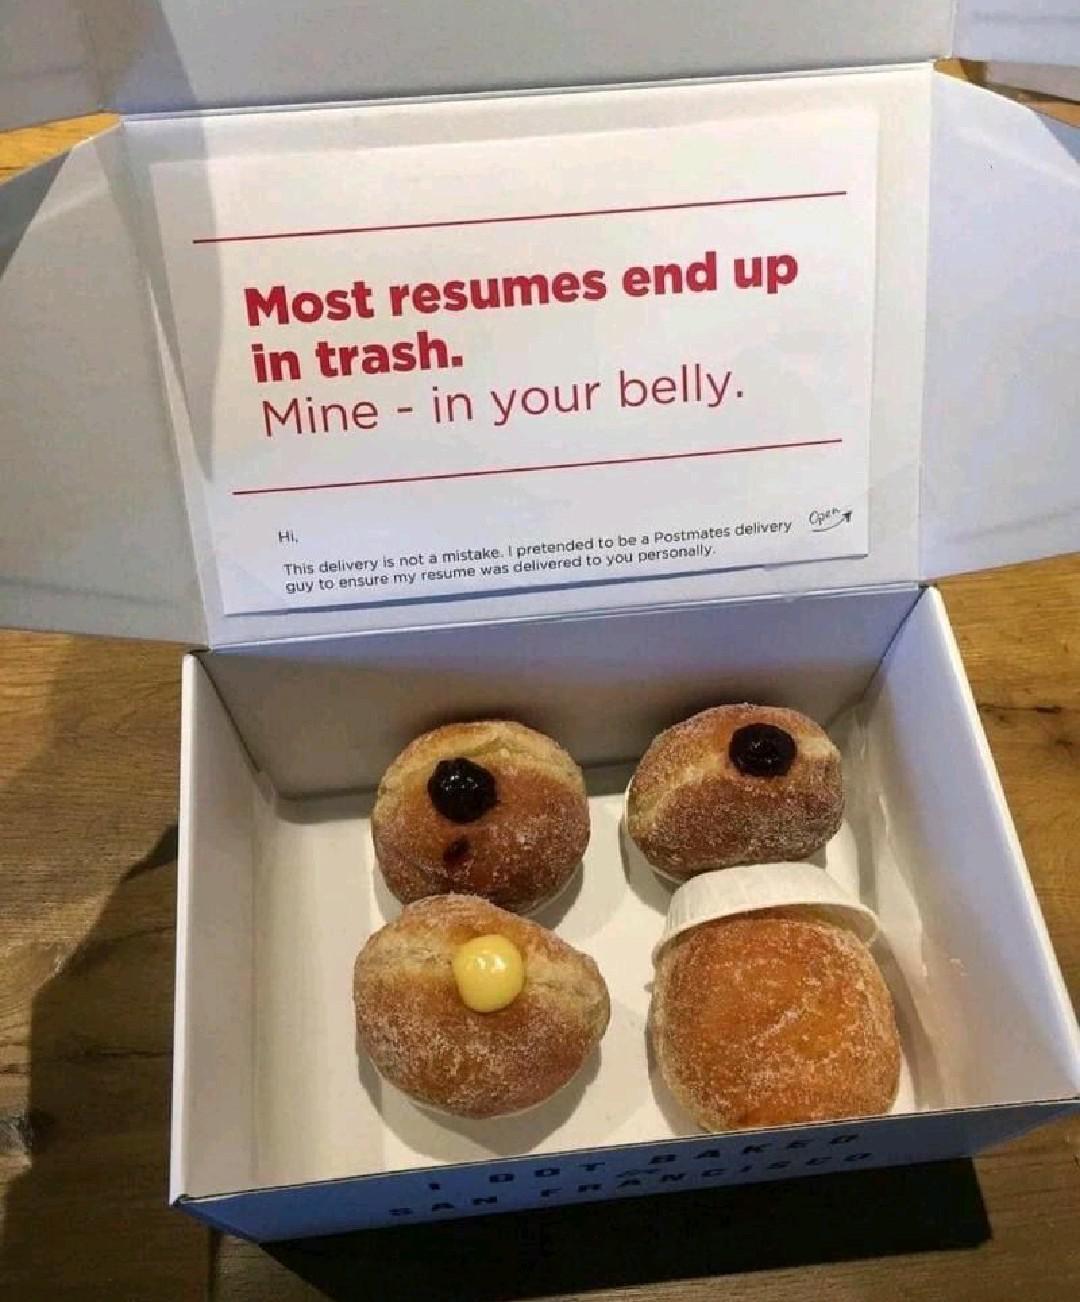 donuts resume - Most resumes end up in trash. Mine in your belly. . Hi. This delivery is not a mistake. I pretended to be a Postmates delivery Opas guy to ensure my resume was delivered to you personally